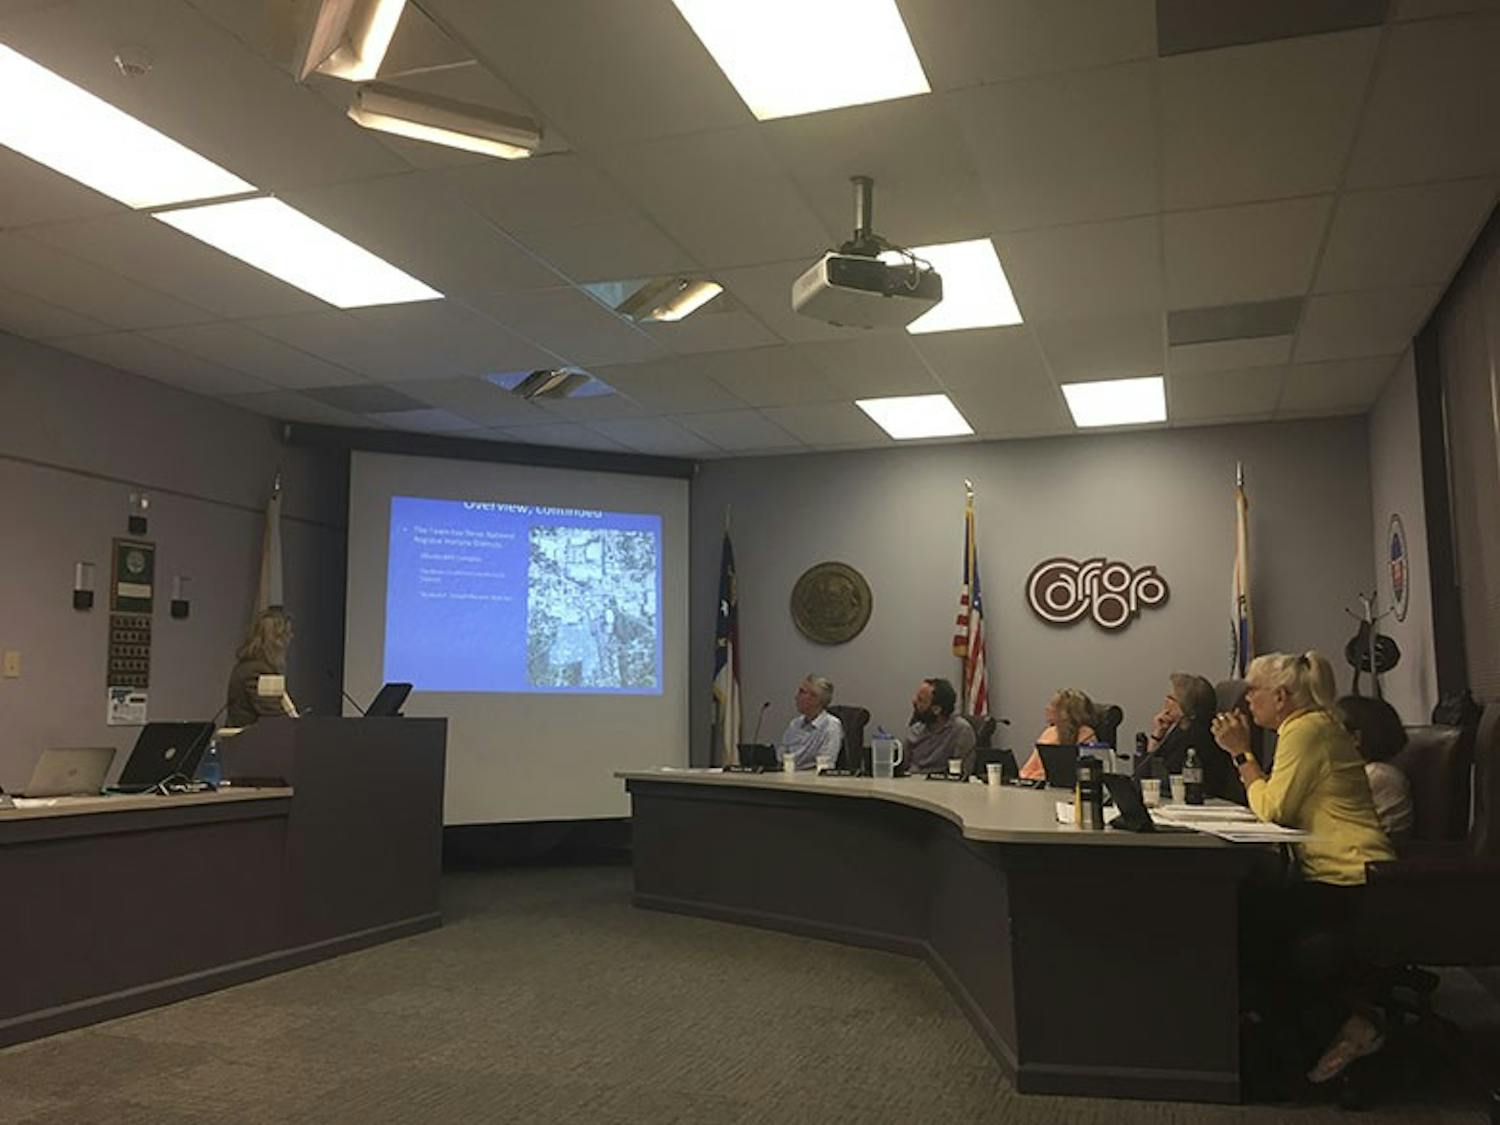 Tina Moon, the Carrboro planning administrator, presented proposed changes to the Carrboro Land Use Ordinance at the Carrboro Board of Alderman meeting on Tuesday of 2016.&nbsp;